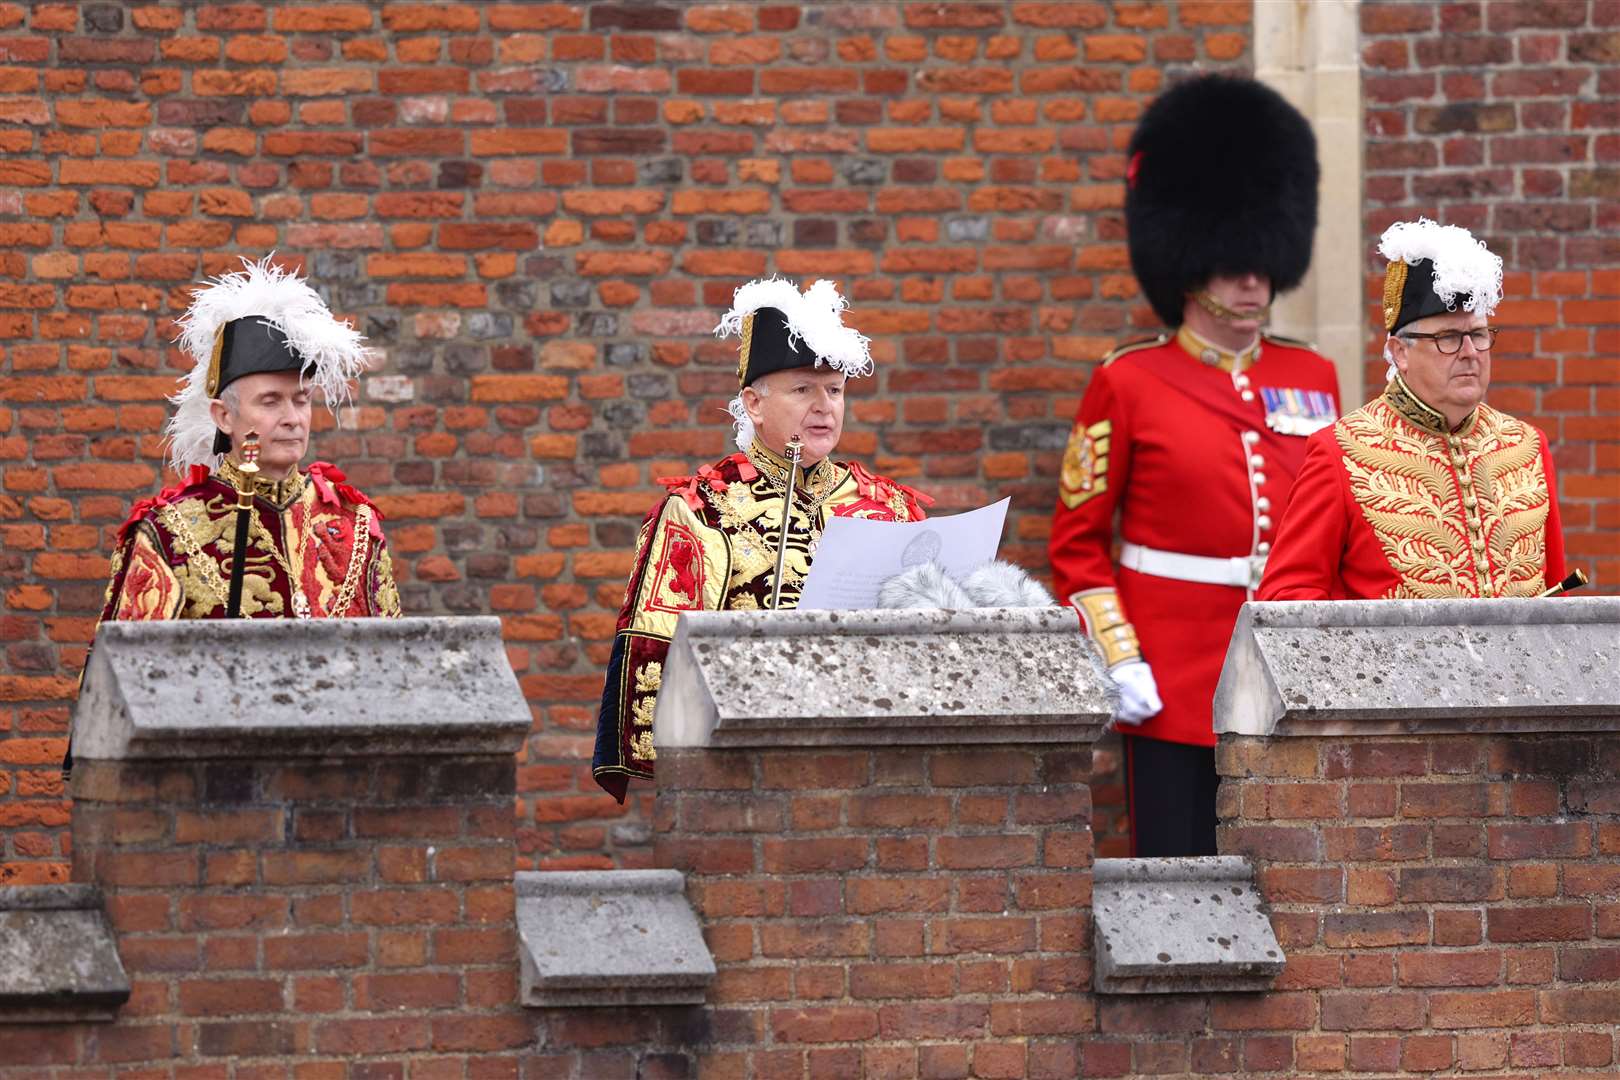 Garter Principal King of Arms, David Vines White, centre, reads the proclamation from the Friary Court balcony of St James’s Palace (Richard Heathcote/PA)